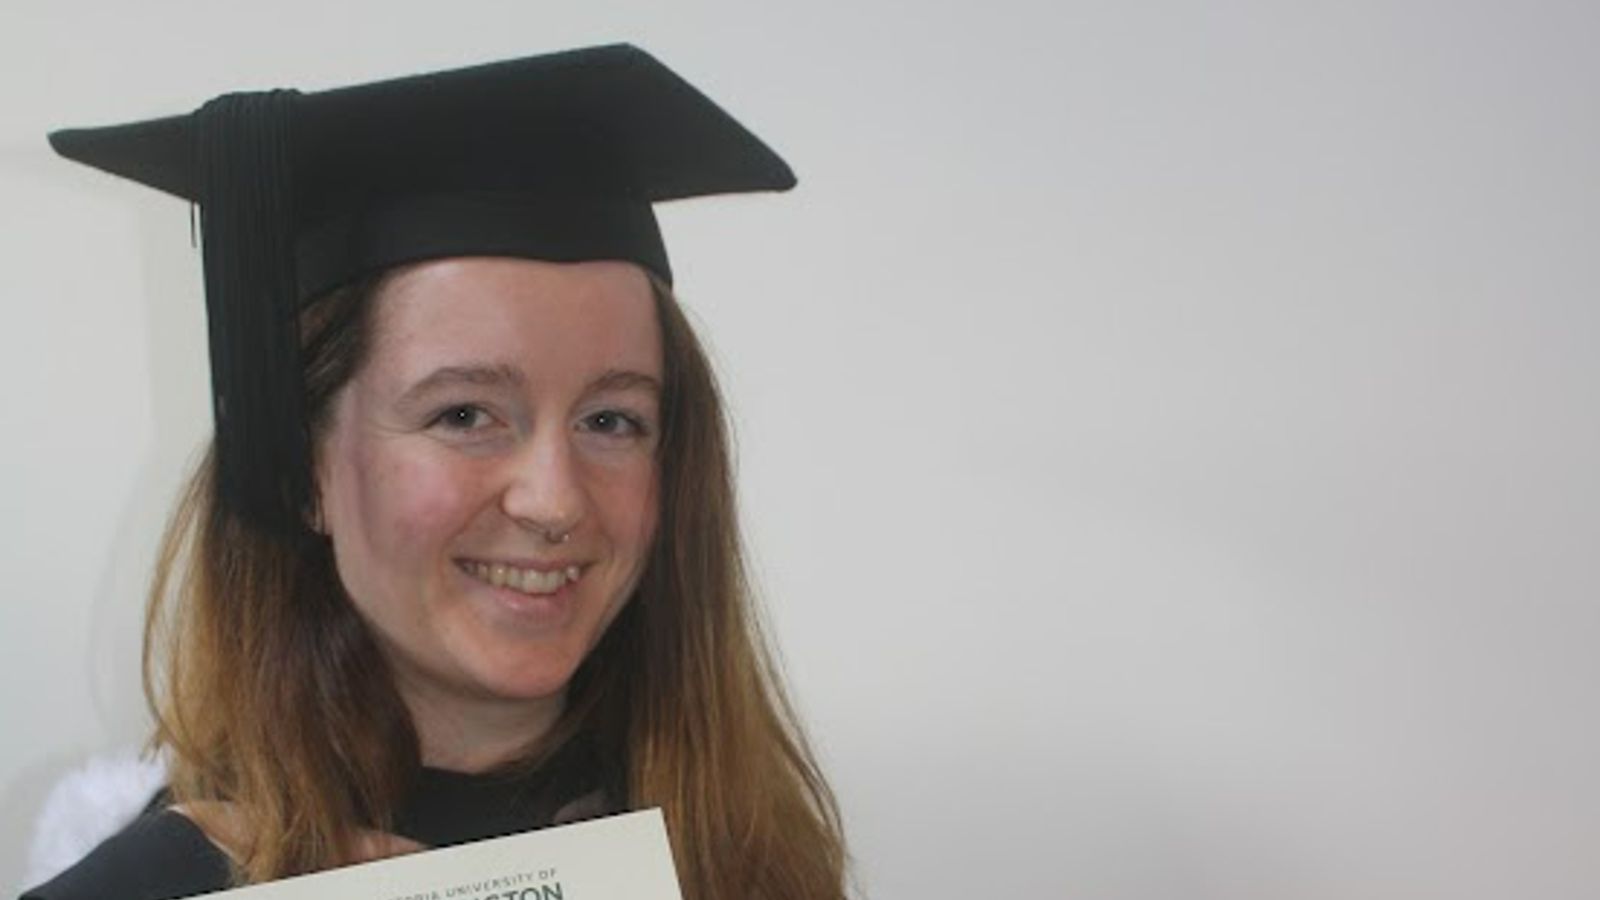 A head and shoulder picture of Marney Edwards wearing a graduation gown and cap.